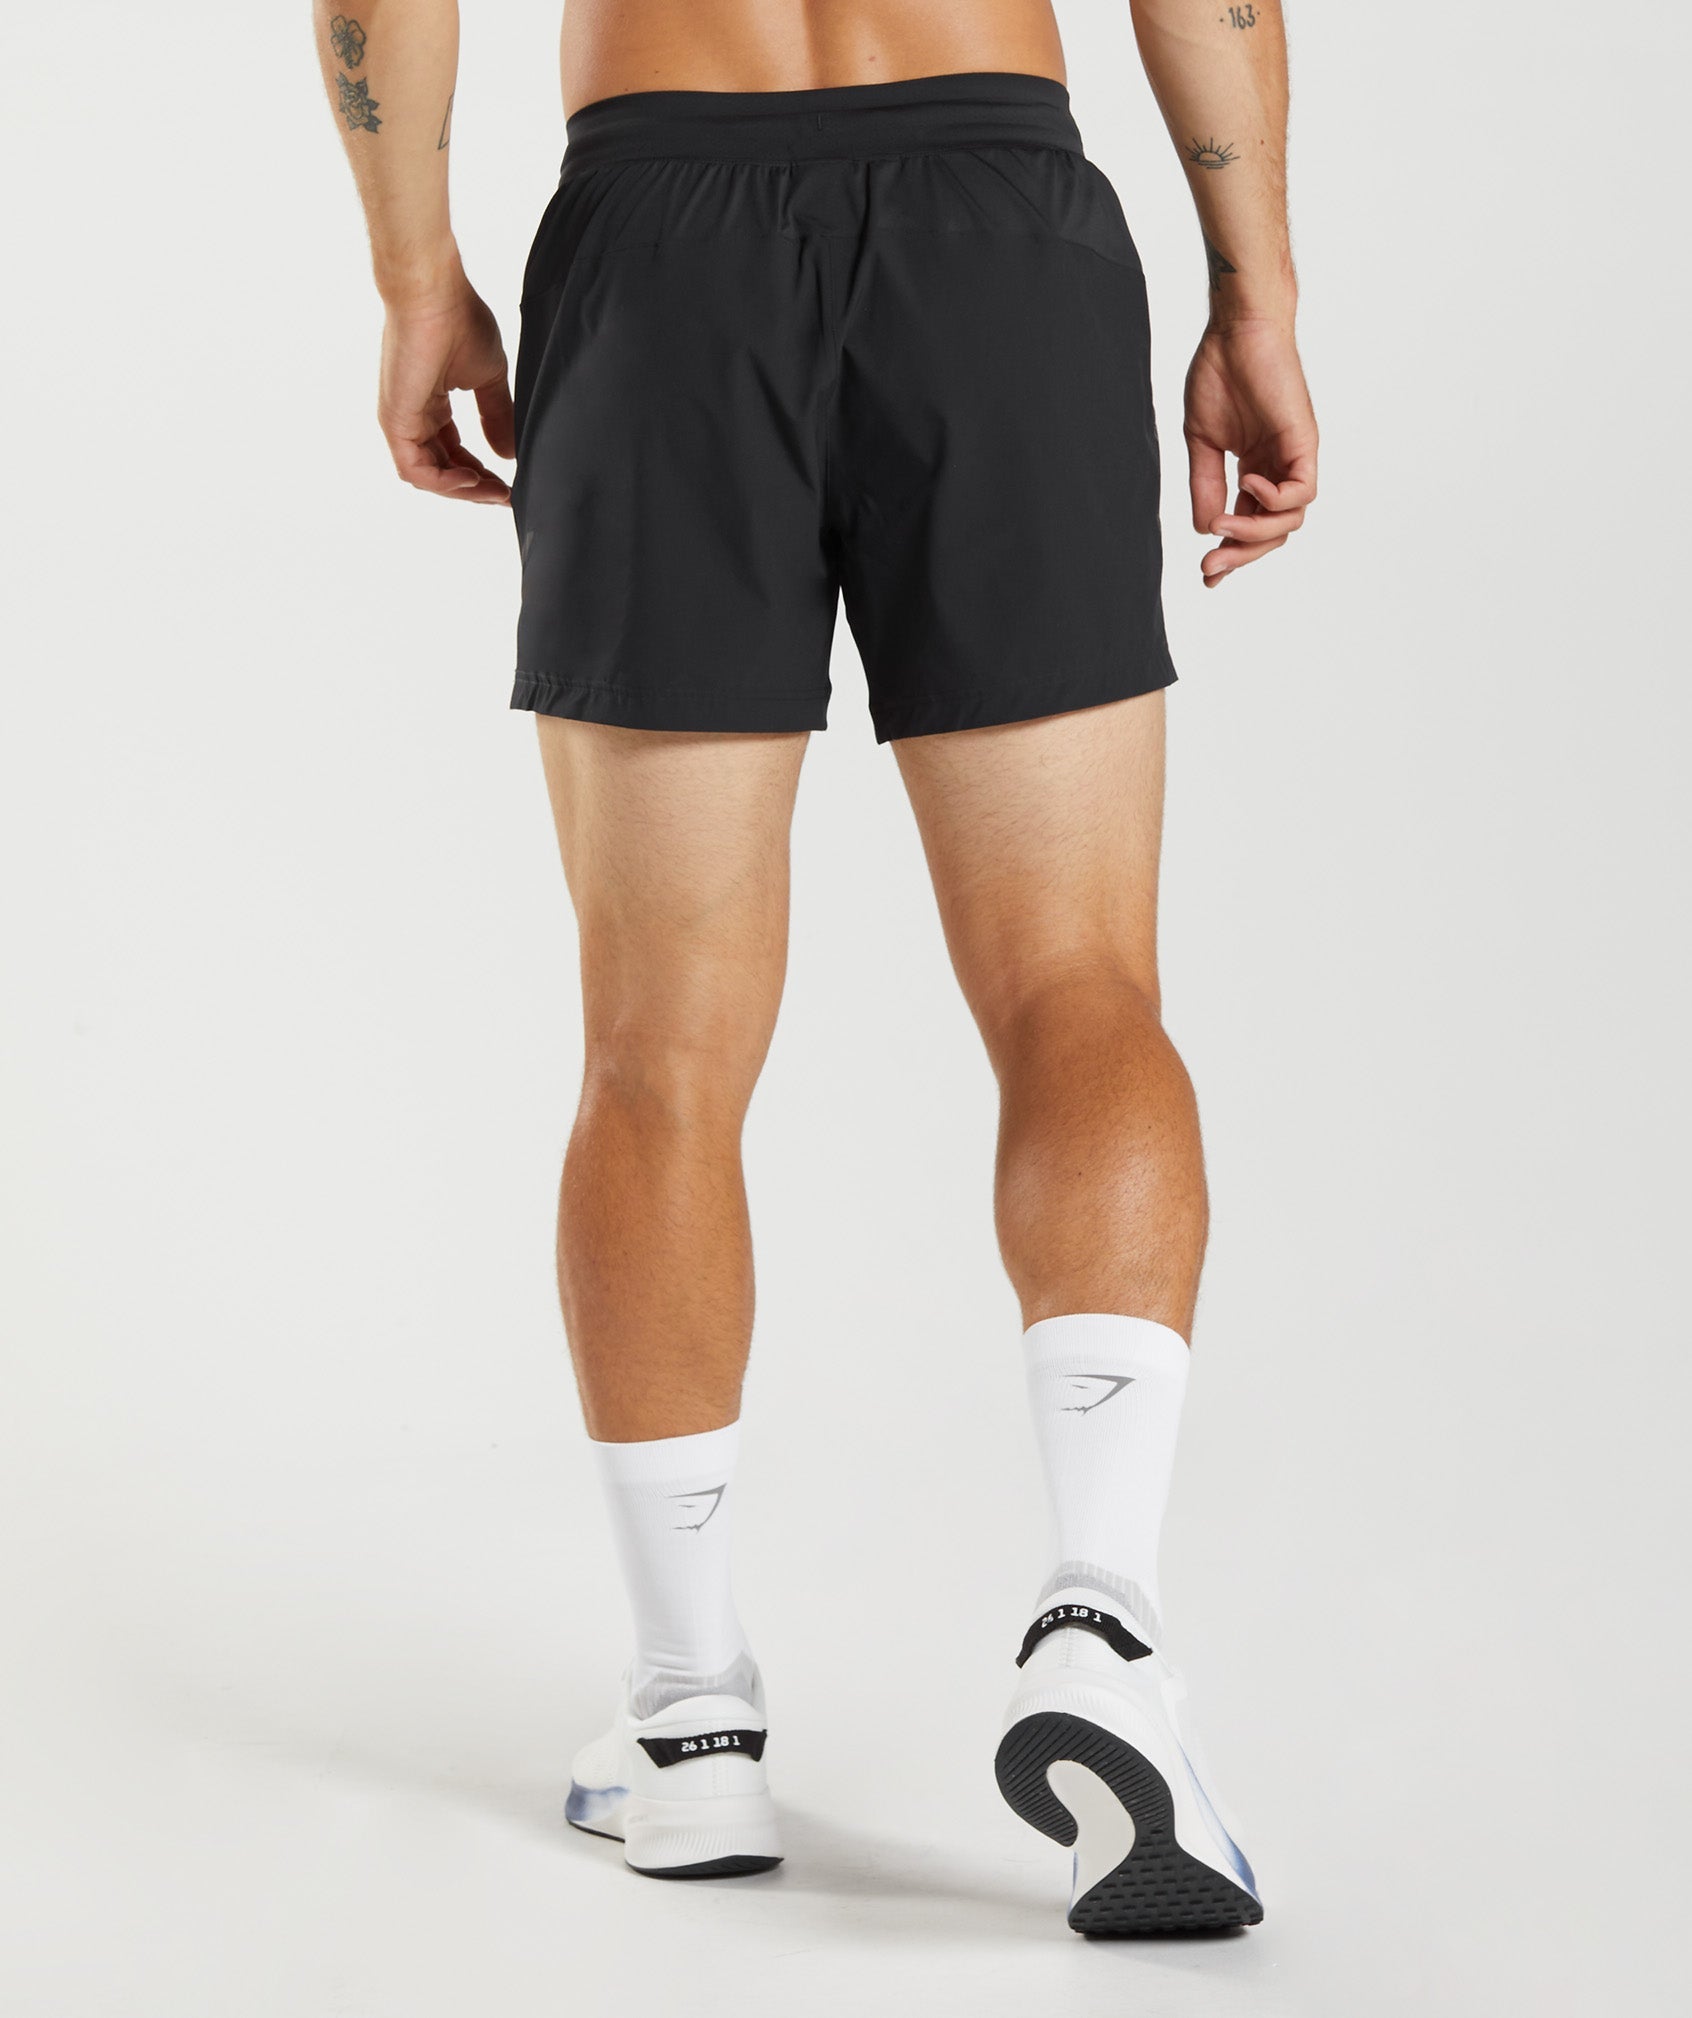 Apex 5" Perform Shorts in Black - view 2